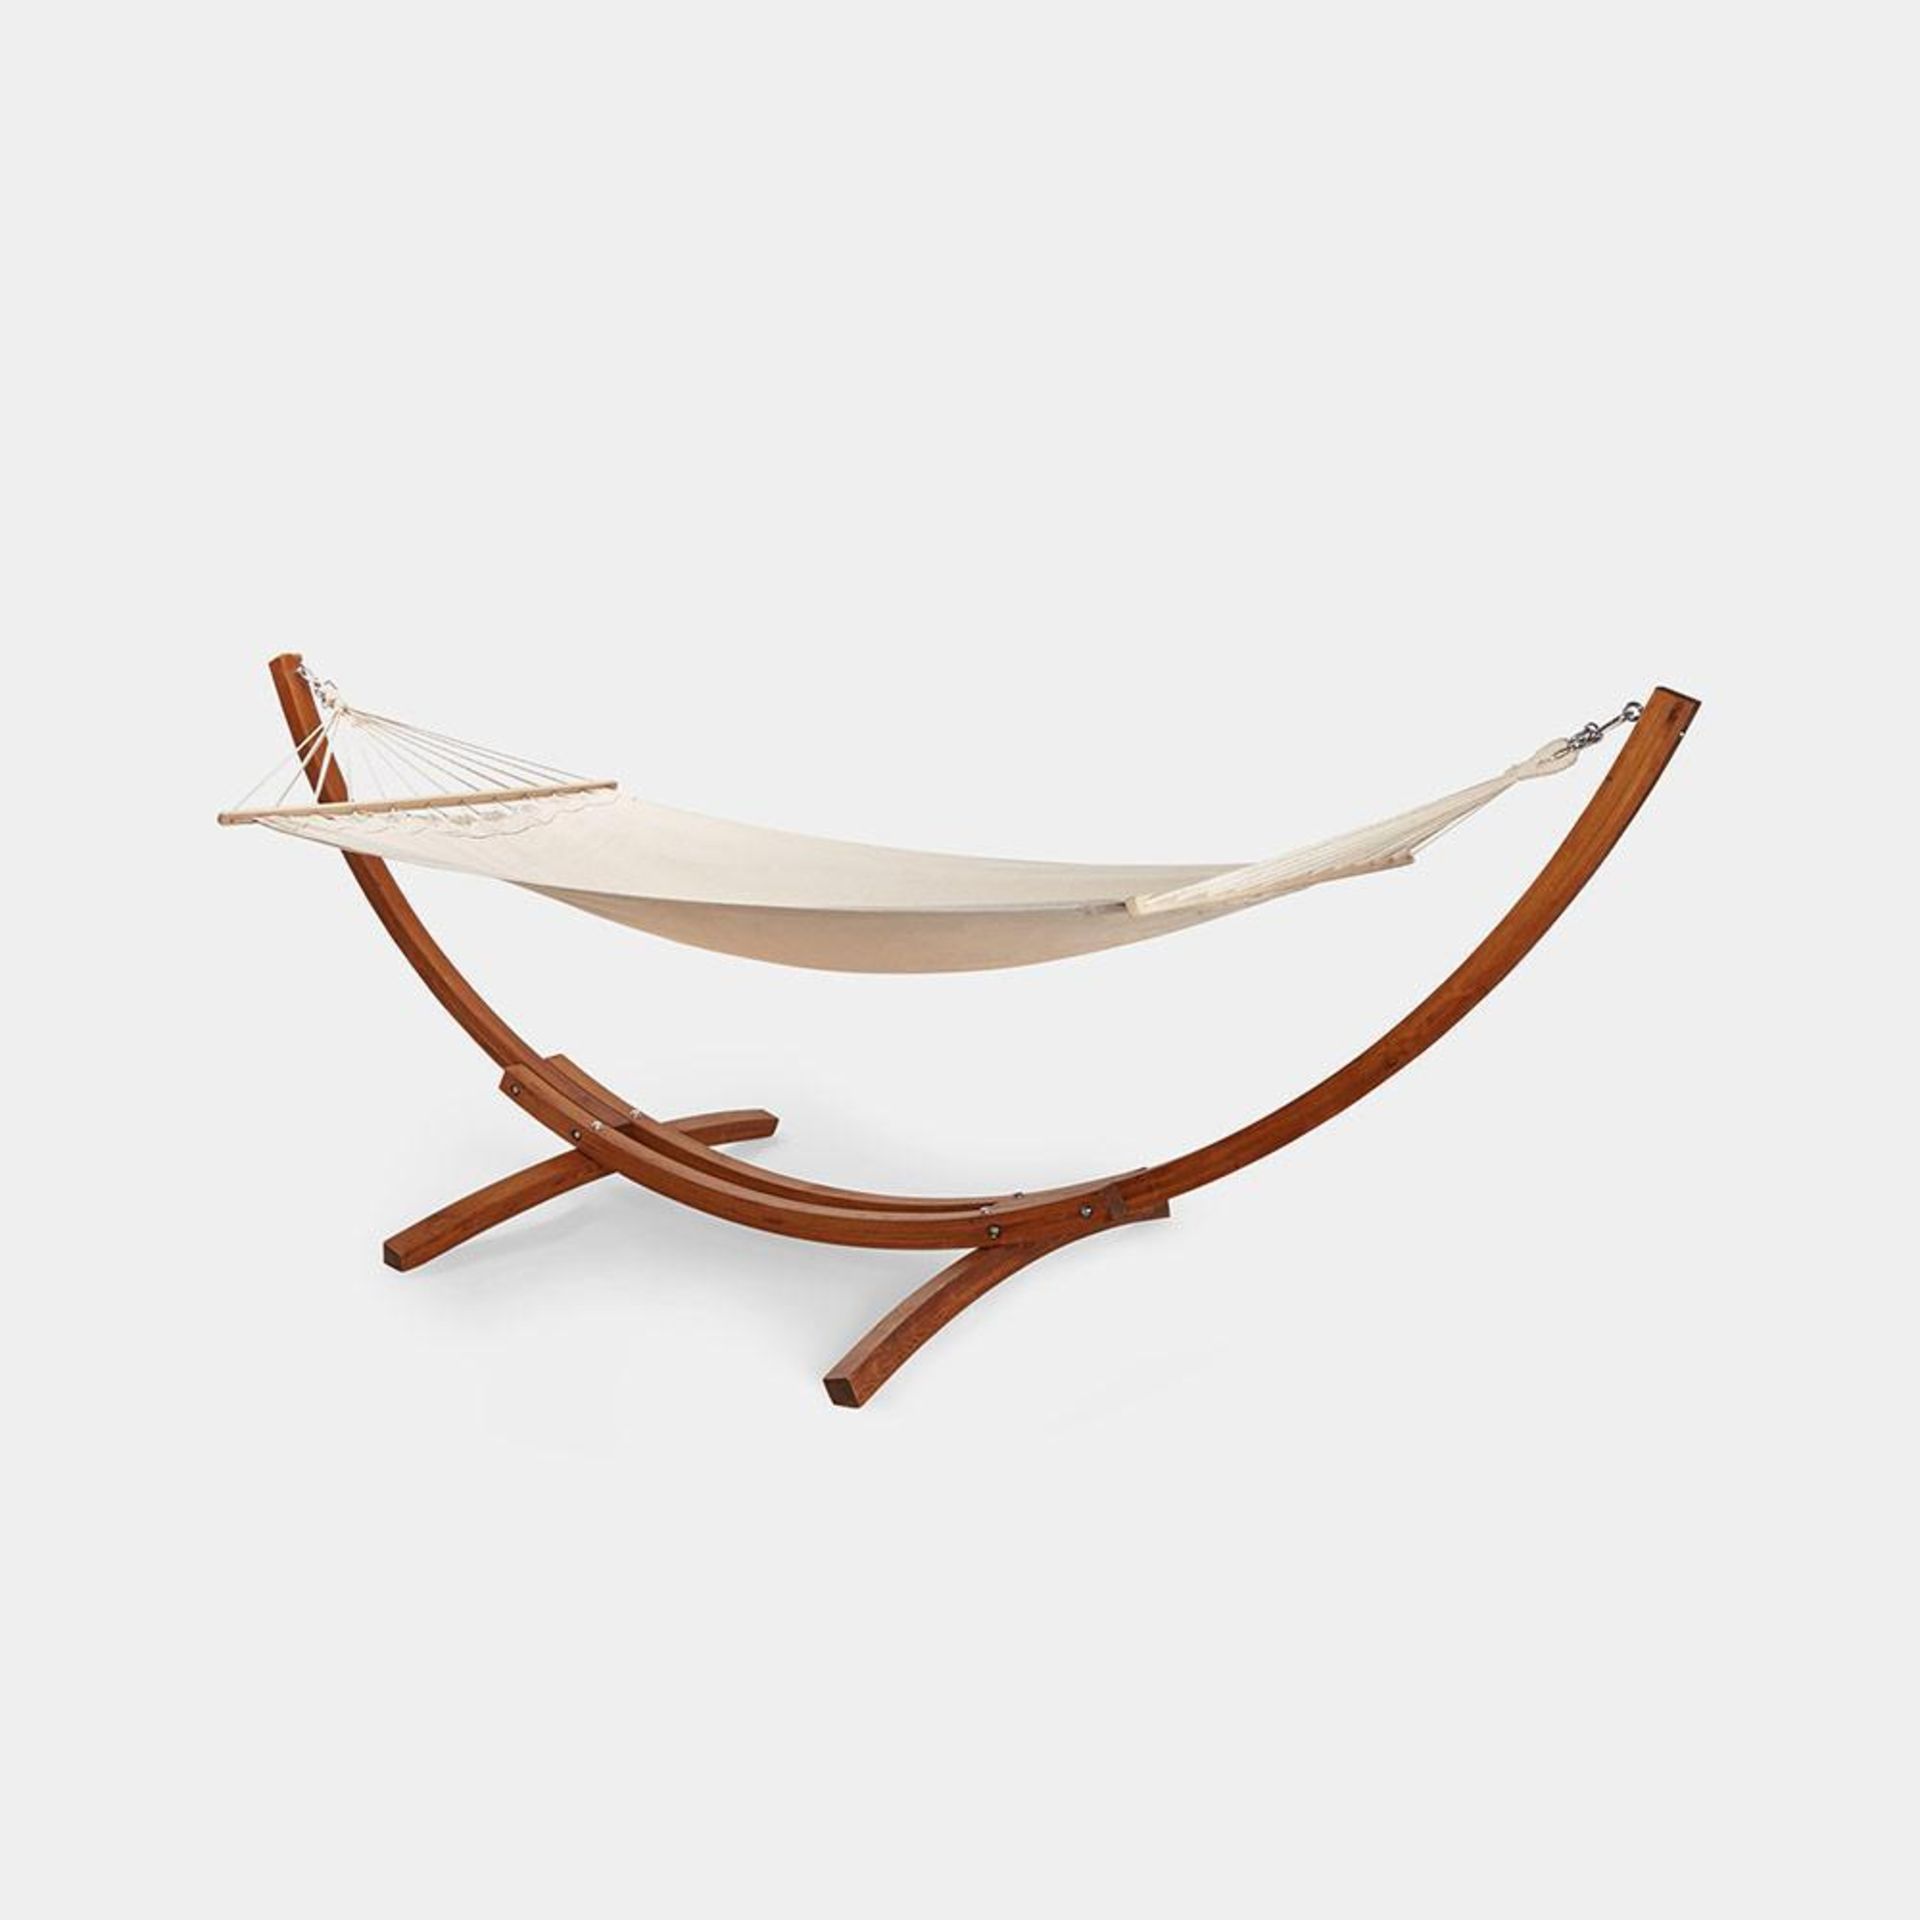 1 Person Hammock with Wooden Frame - PW Relax in the sun and enjoy your outdoor living space with